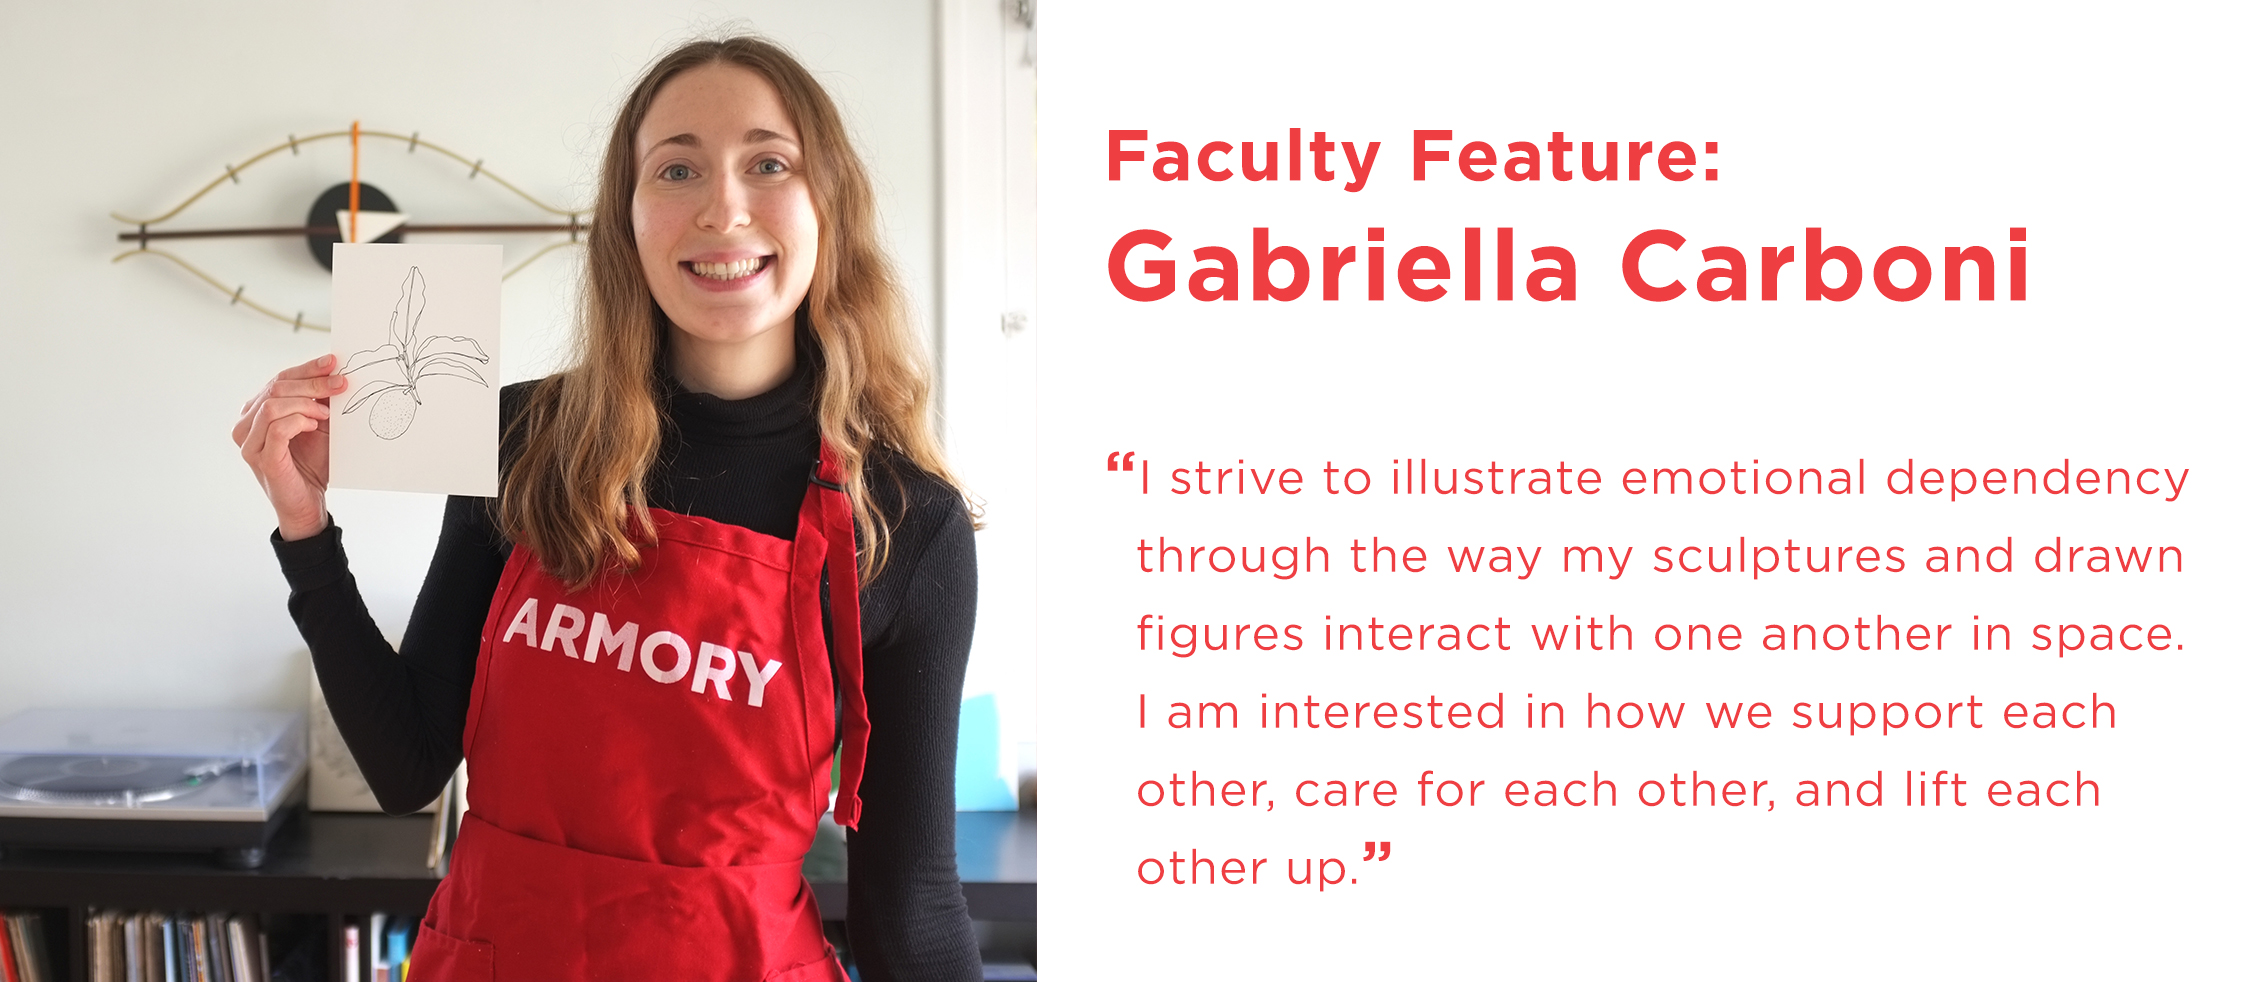 Faculty Feature: Gabriella Carboni 